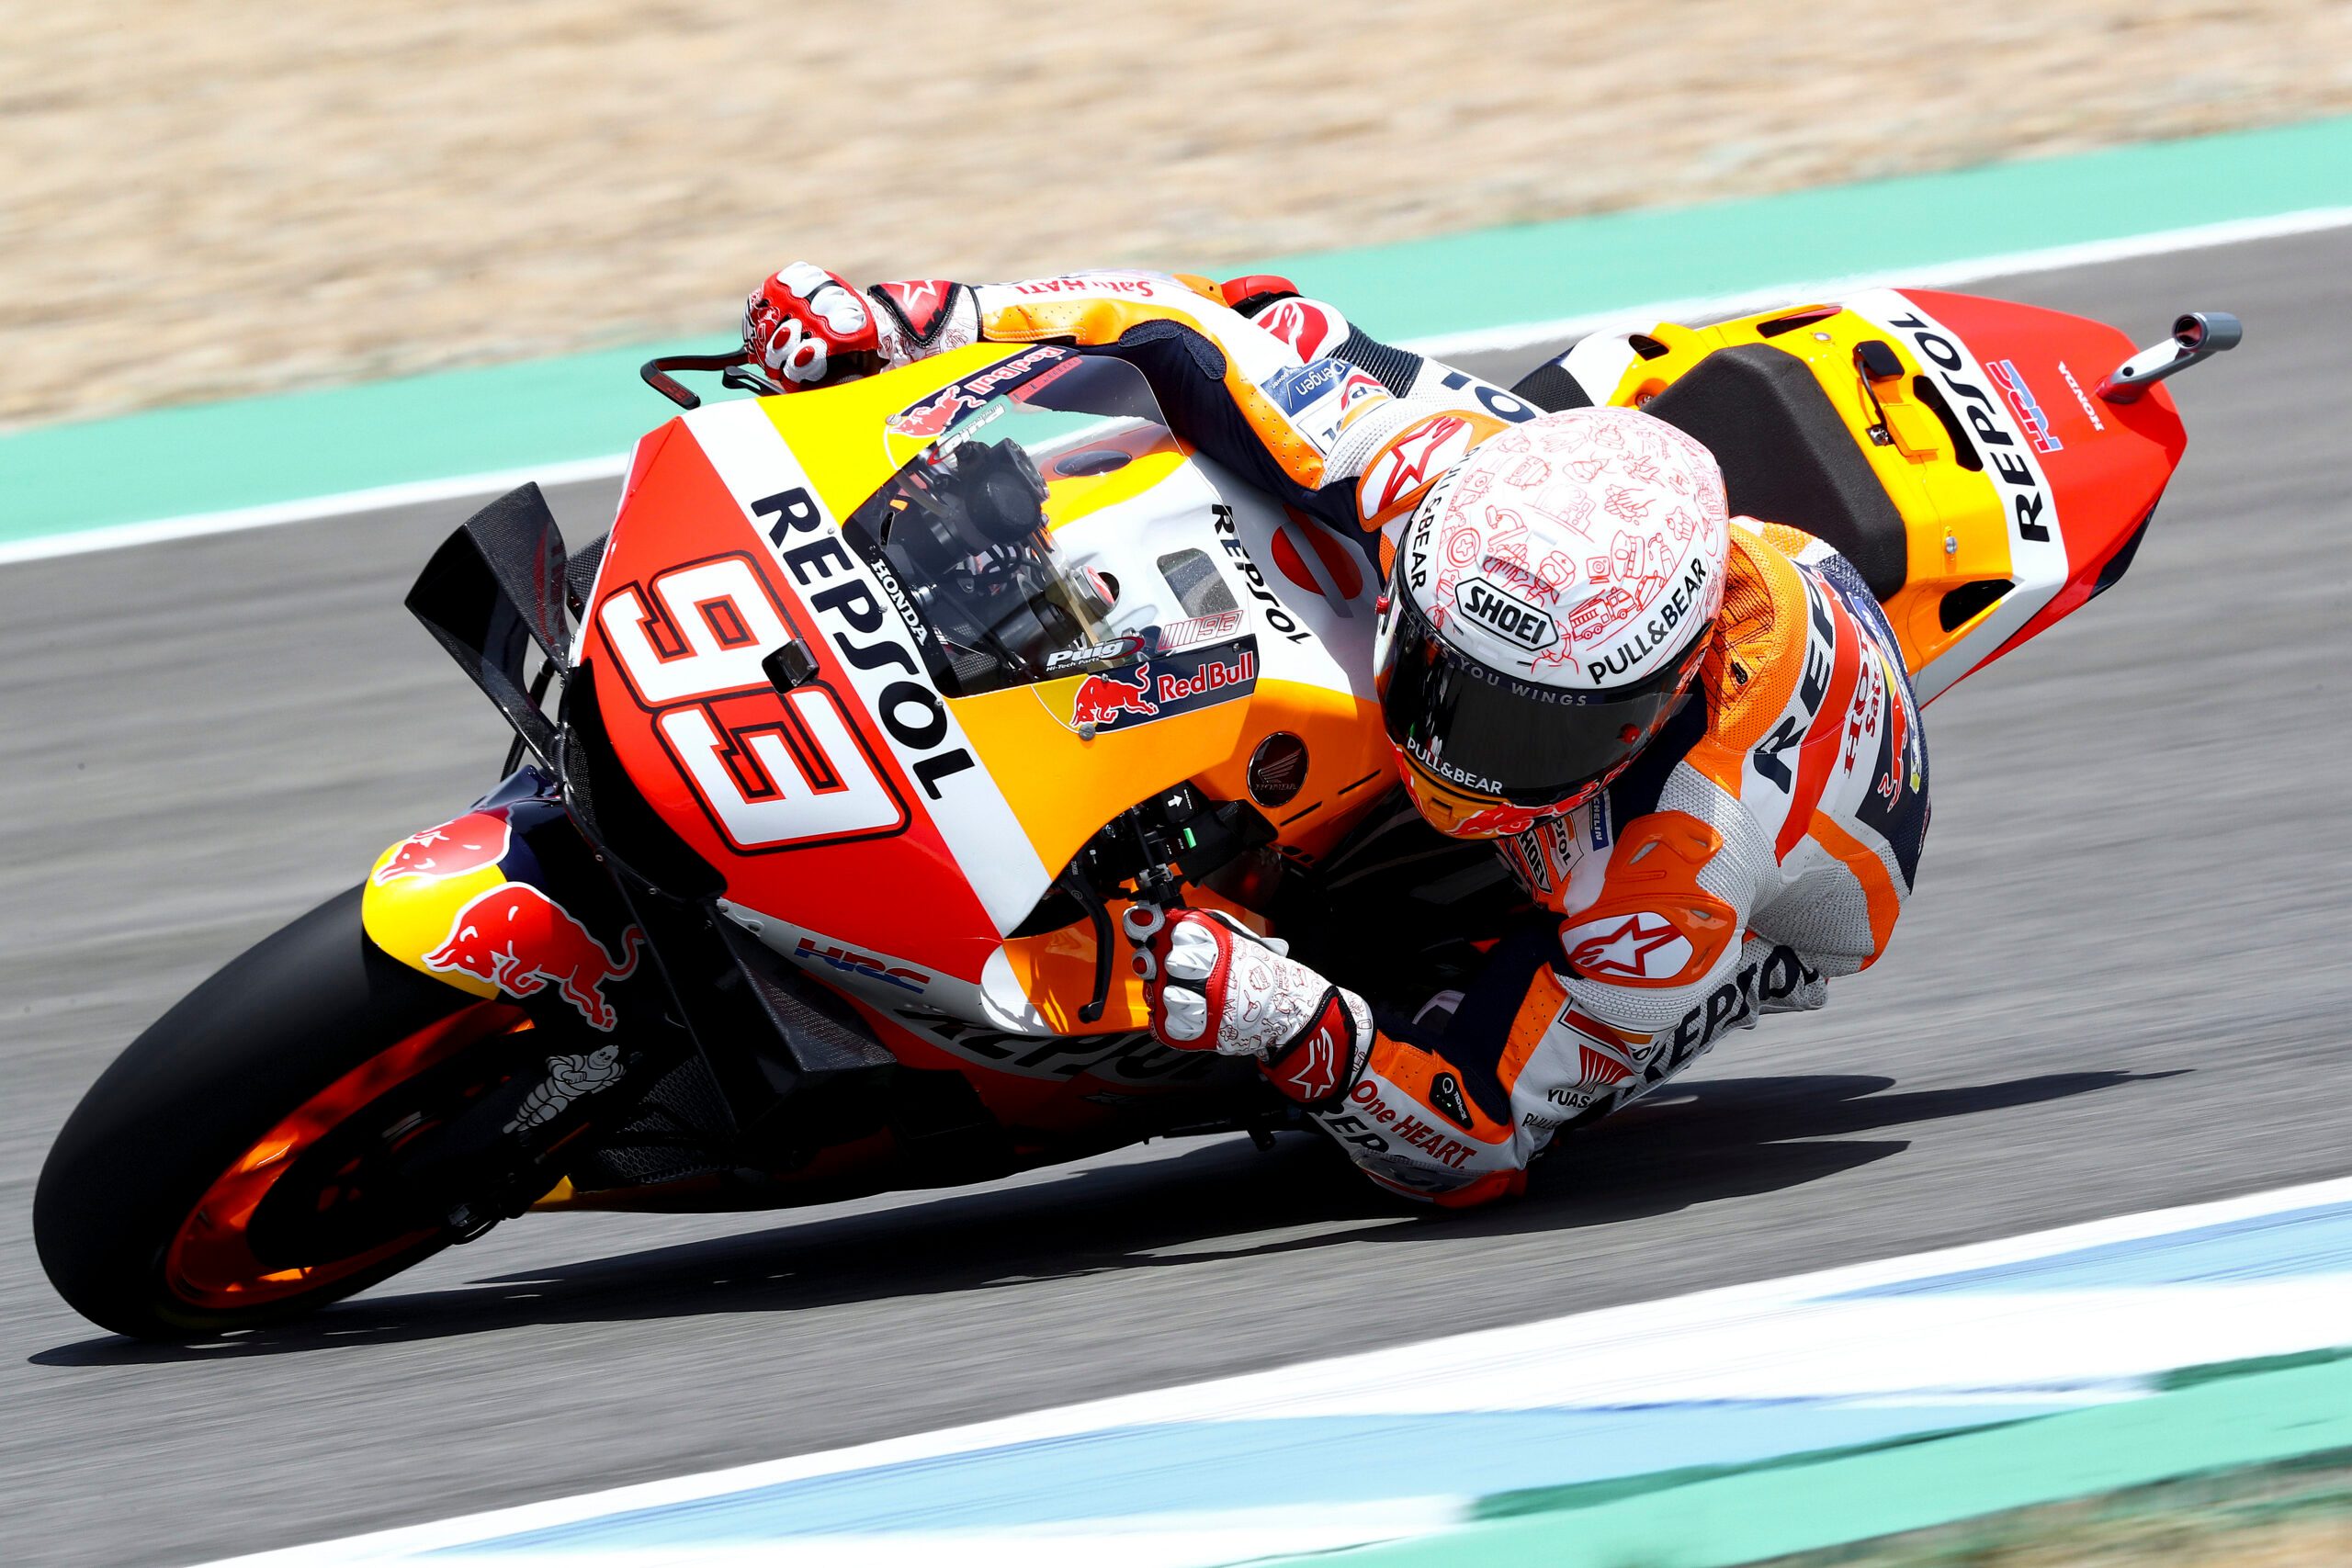 Marc Marquez performs during the MotoGP World Championship in Jerez, Spain on July 17, 2020.